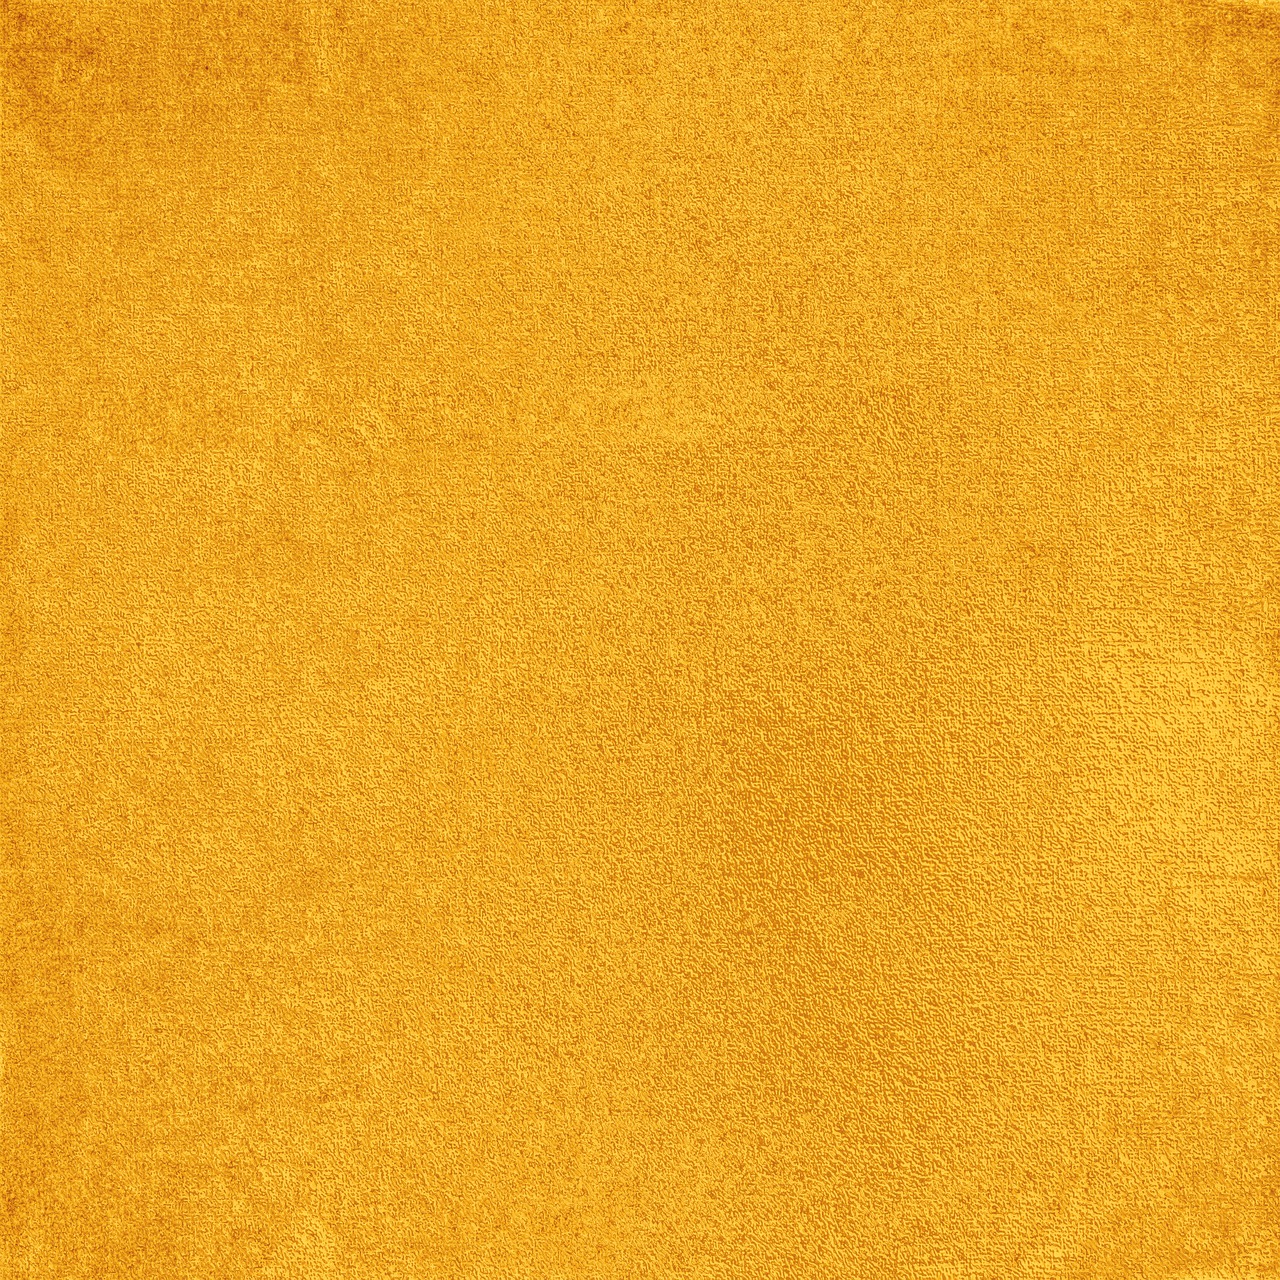 background gold texture free photo